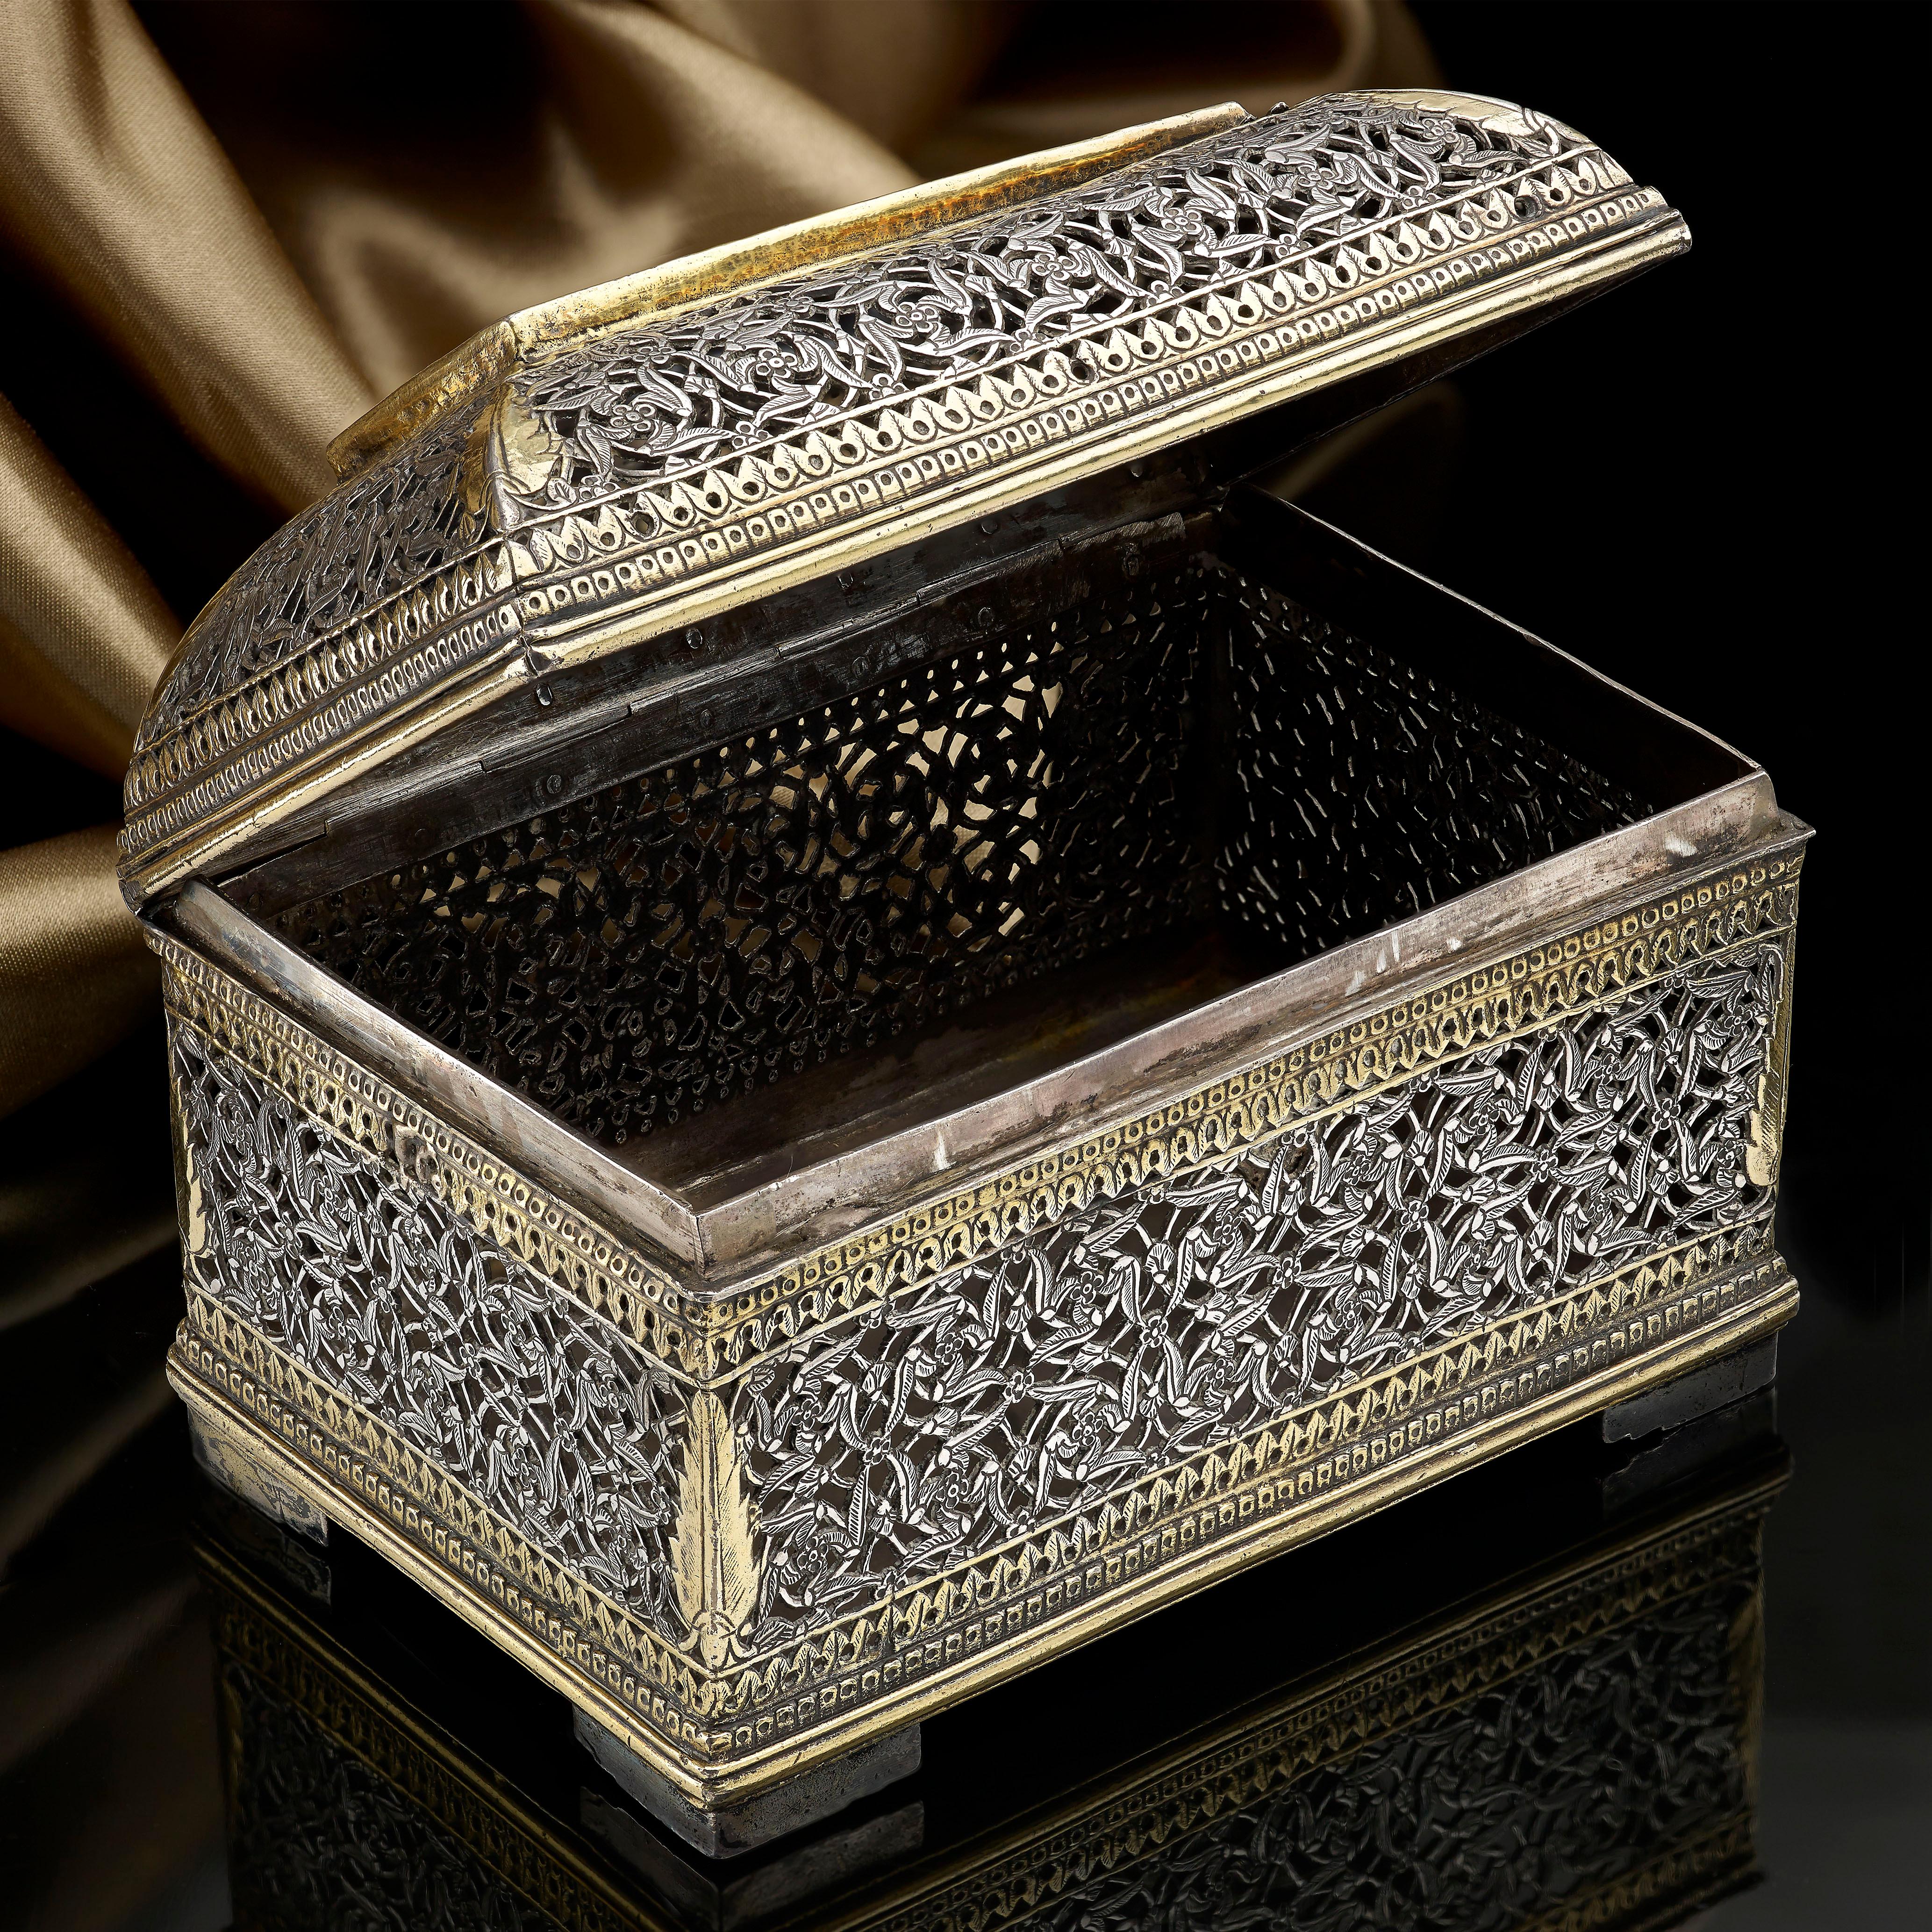 A little Indo–Portuguese silver and parcel gilt box with intricate pierced decoration, late 17th century; approx 4 1/2 inches wide, 3 1/4 inches tall and 3 inches deep. The piece weighs 10 oz approx.